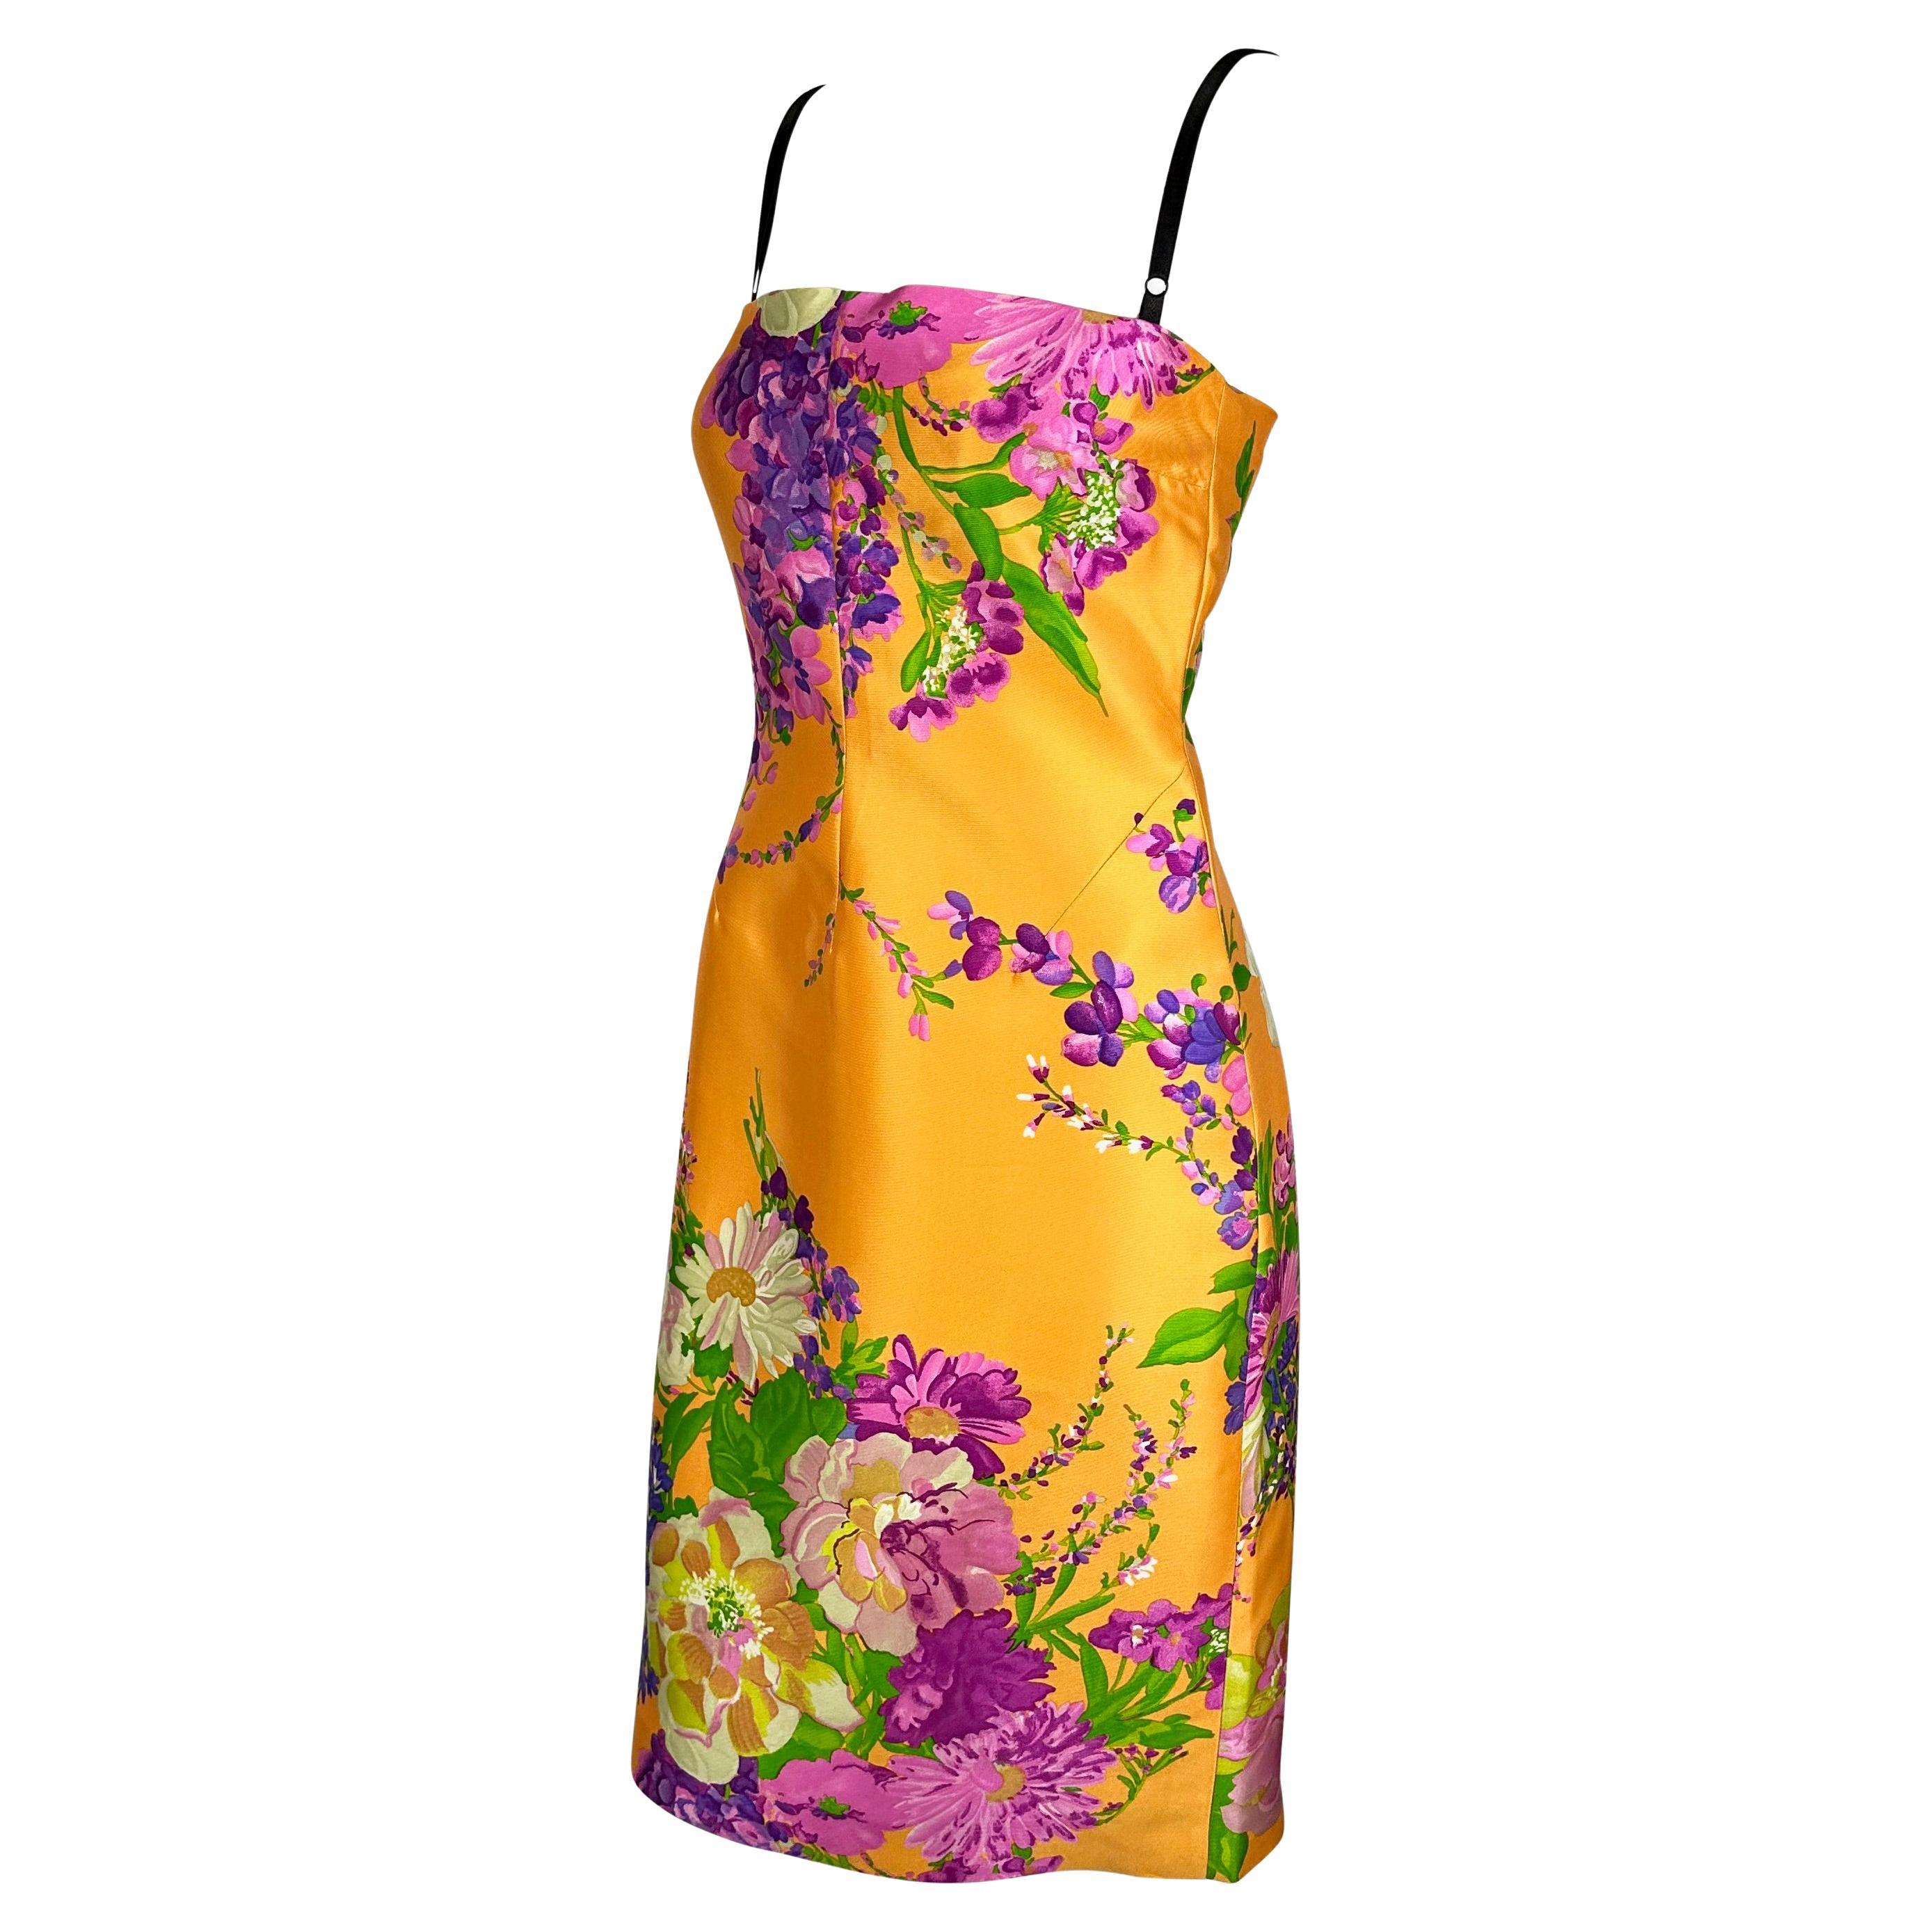 Presenting a fabulous vibrant orange floral Dolce and Gabbana Dress. From the Spring/Summer 2000 collection, this fabulous orange silk dress features a large multicolored flower print throughout. The dress is made complete with a built-in black lace